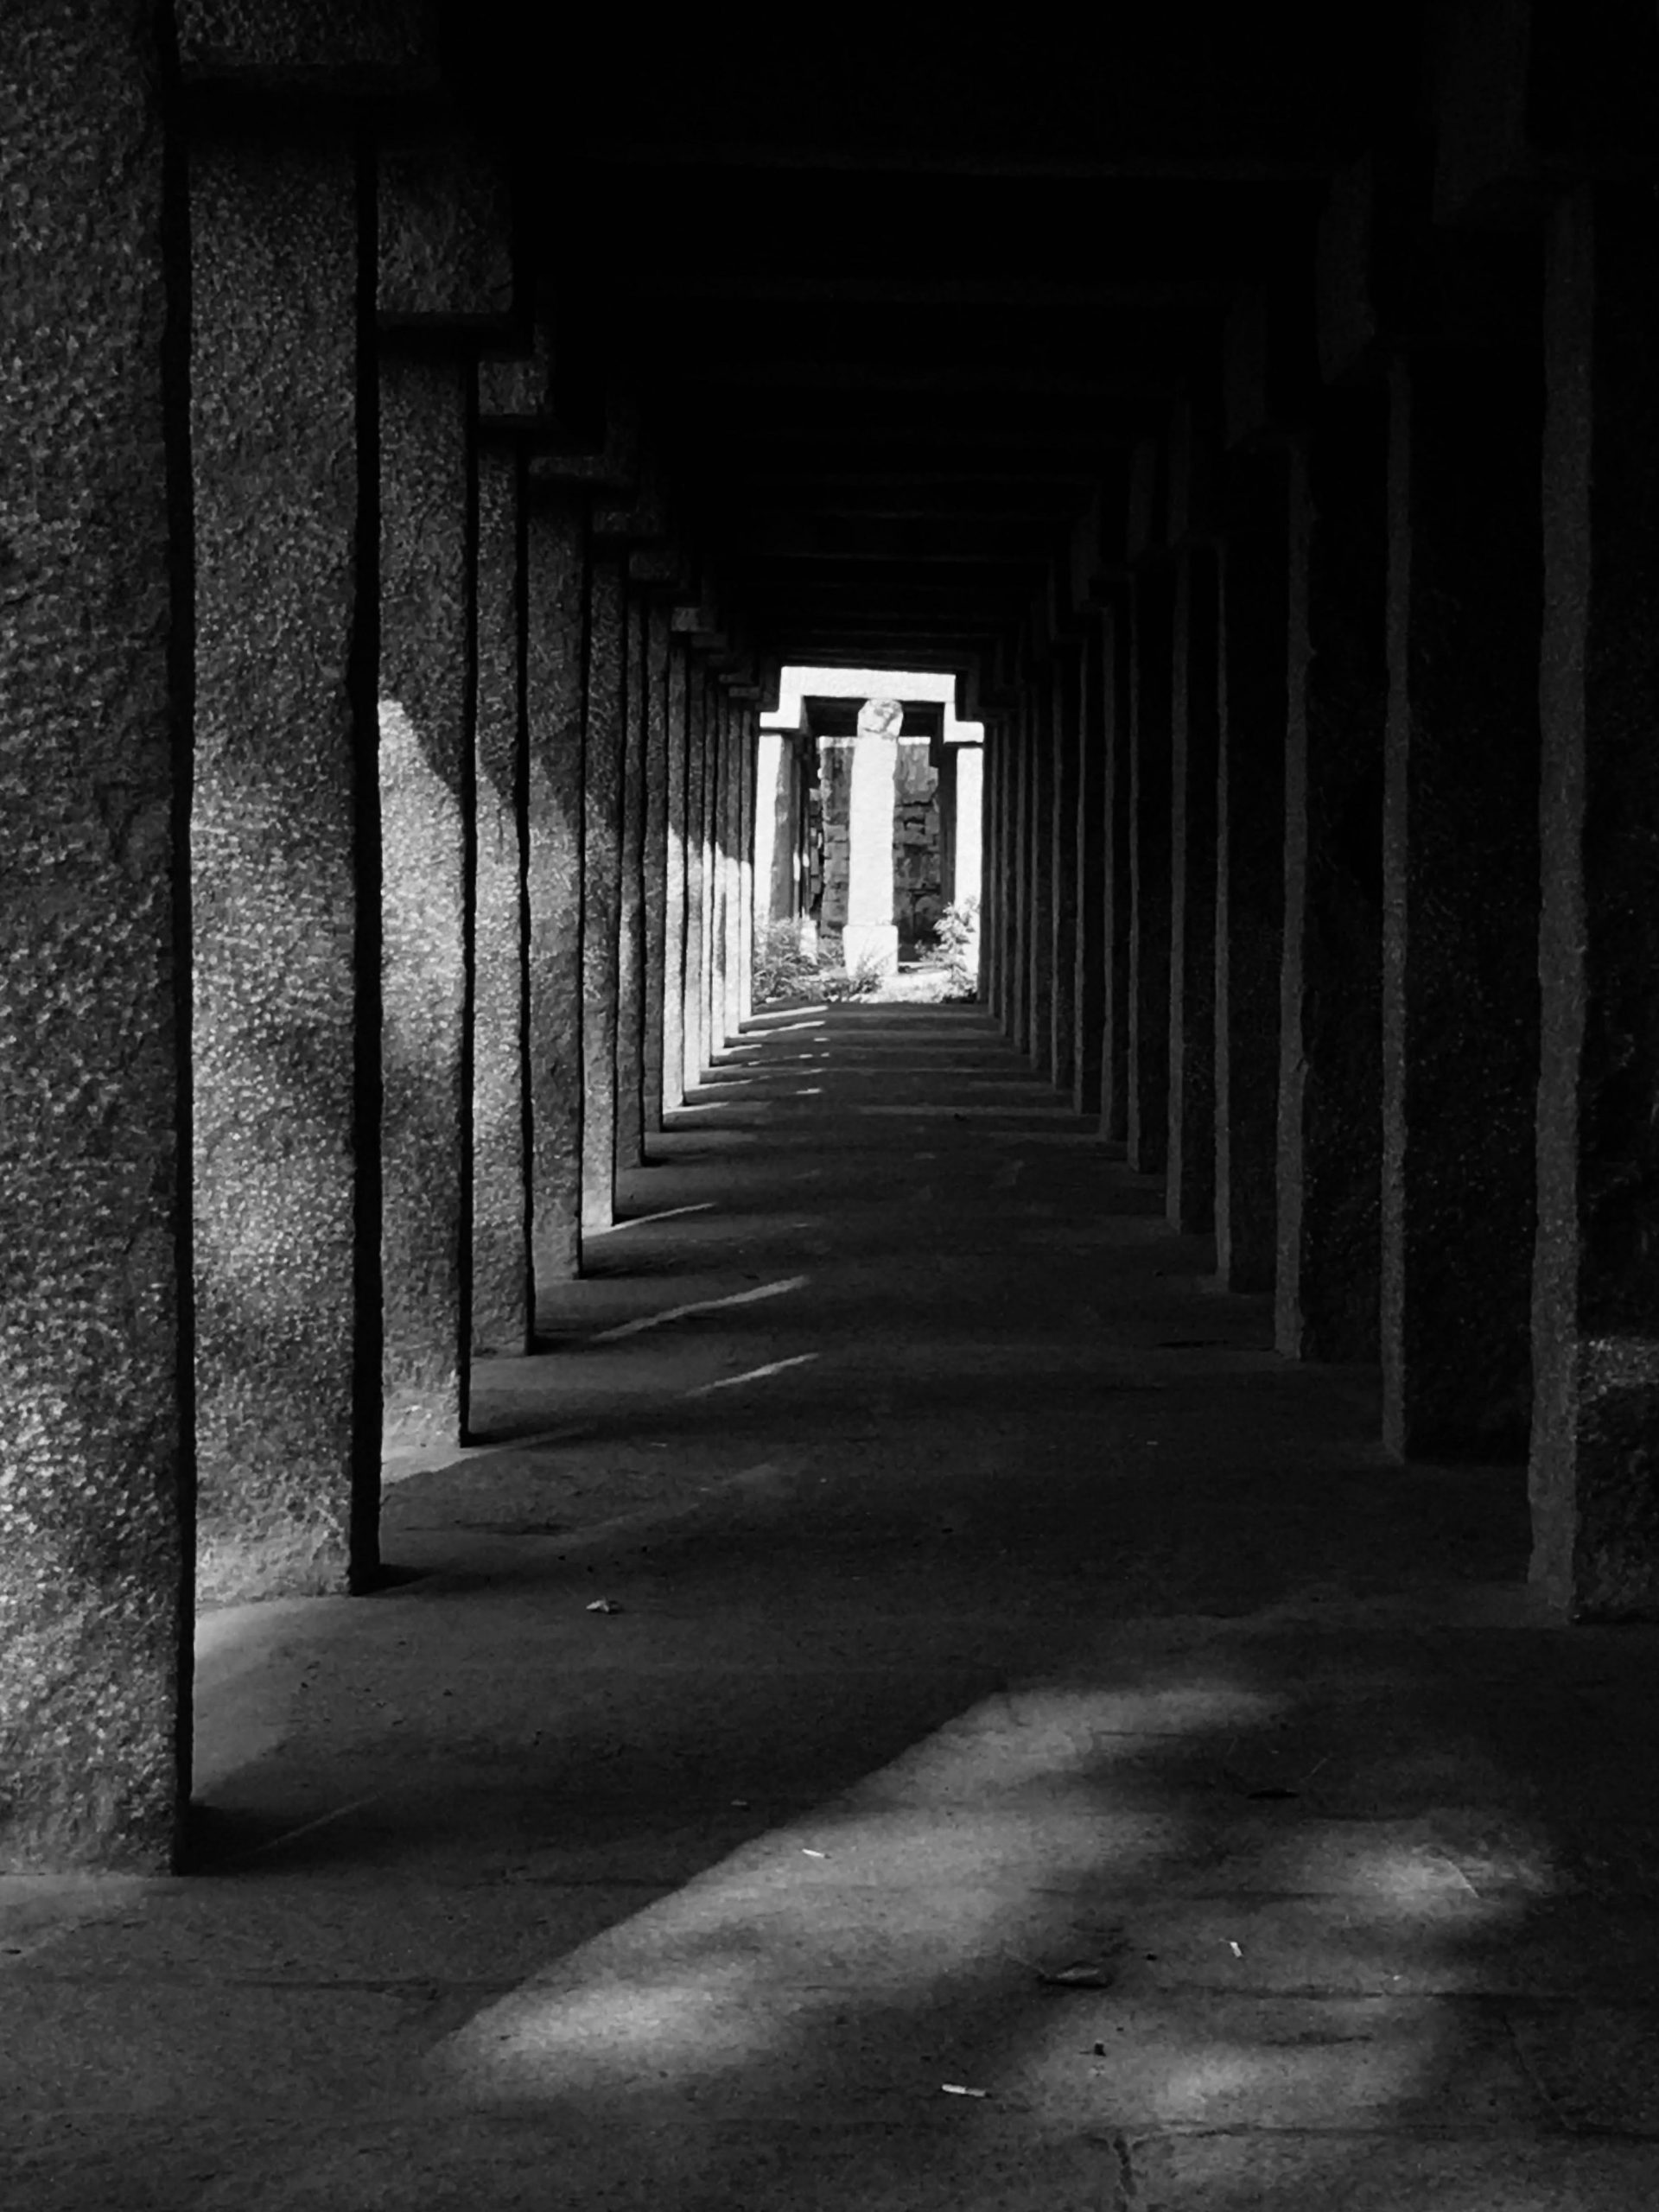 Pillars in black and white